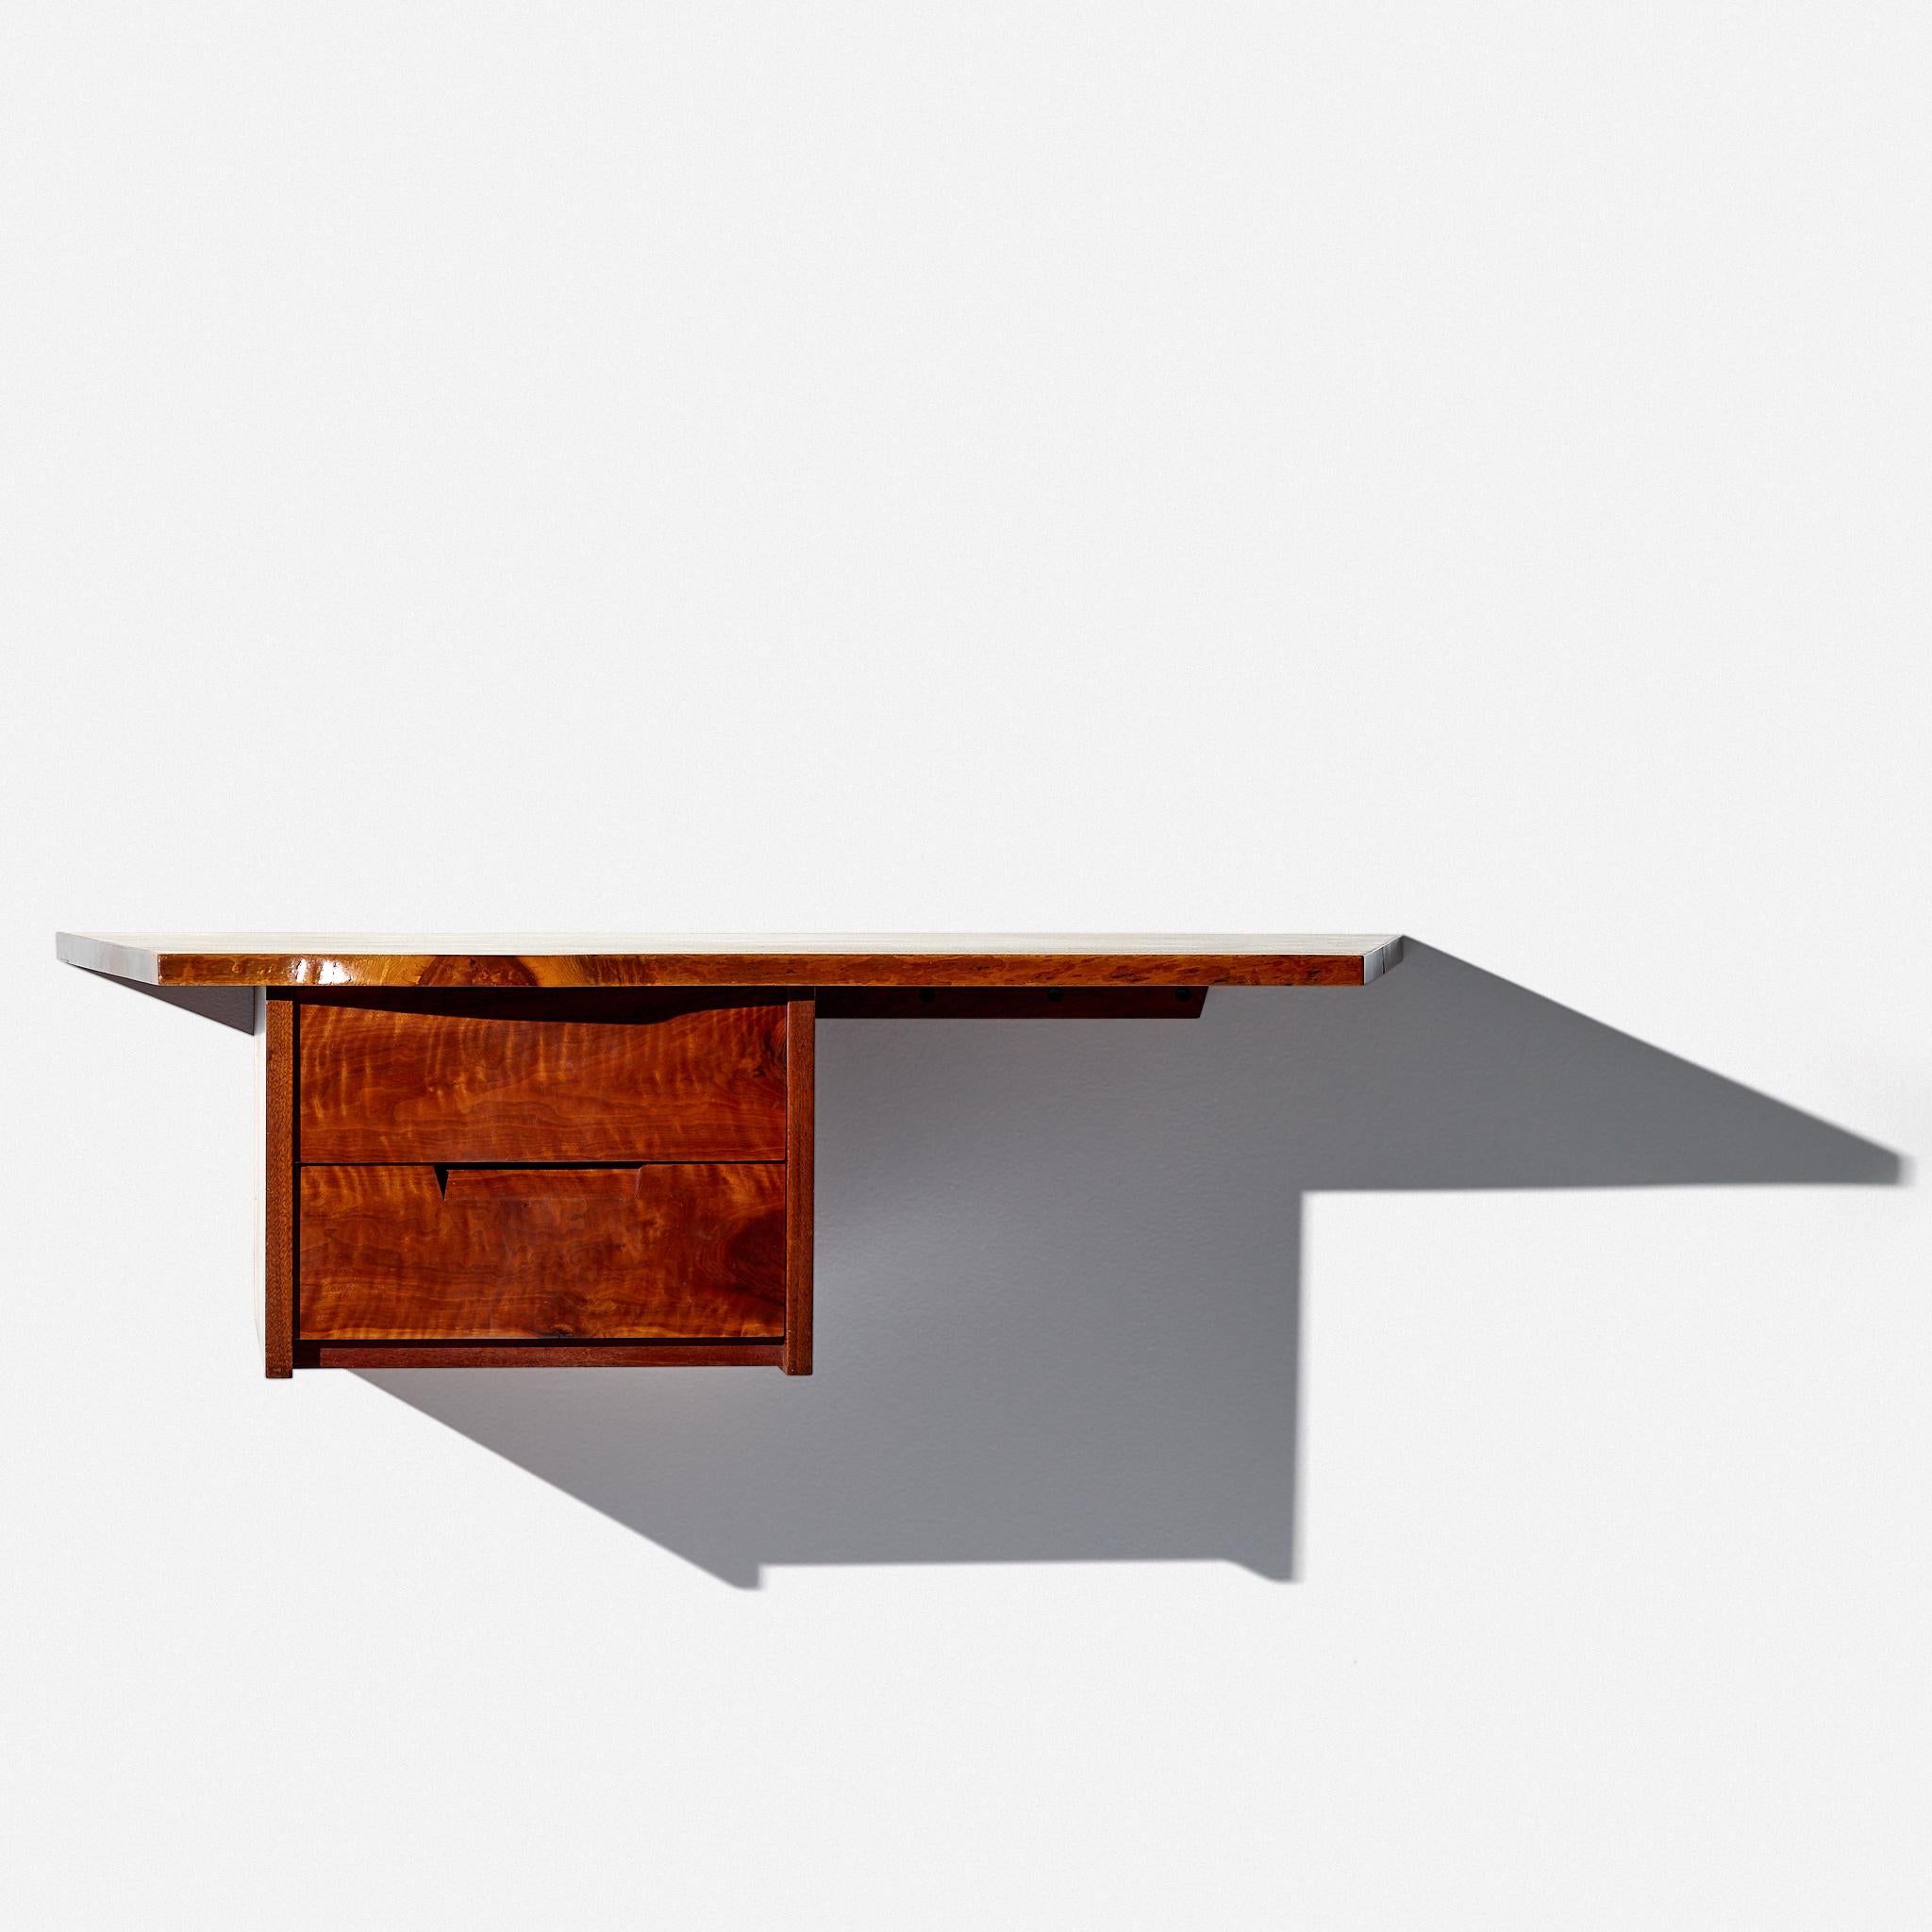 George Nakashima
Hanging wall mount desk
Nakashima Studio,
circa 1960s
American black walnut
Measures: 42 W × 20 D × 13 H inches

Highly figured overhanging top. Highly figured drawer fronts.

Sold with the original drawing.